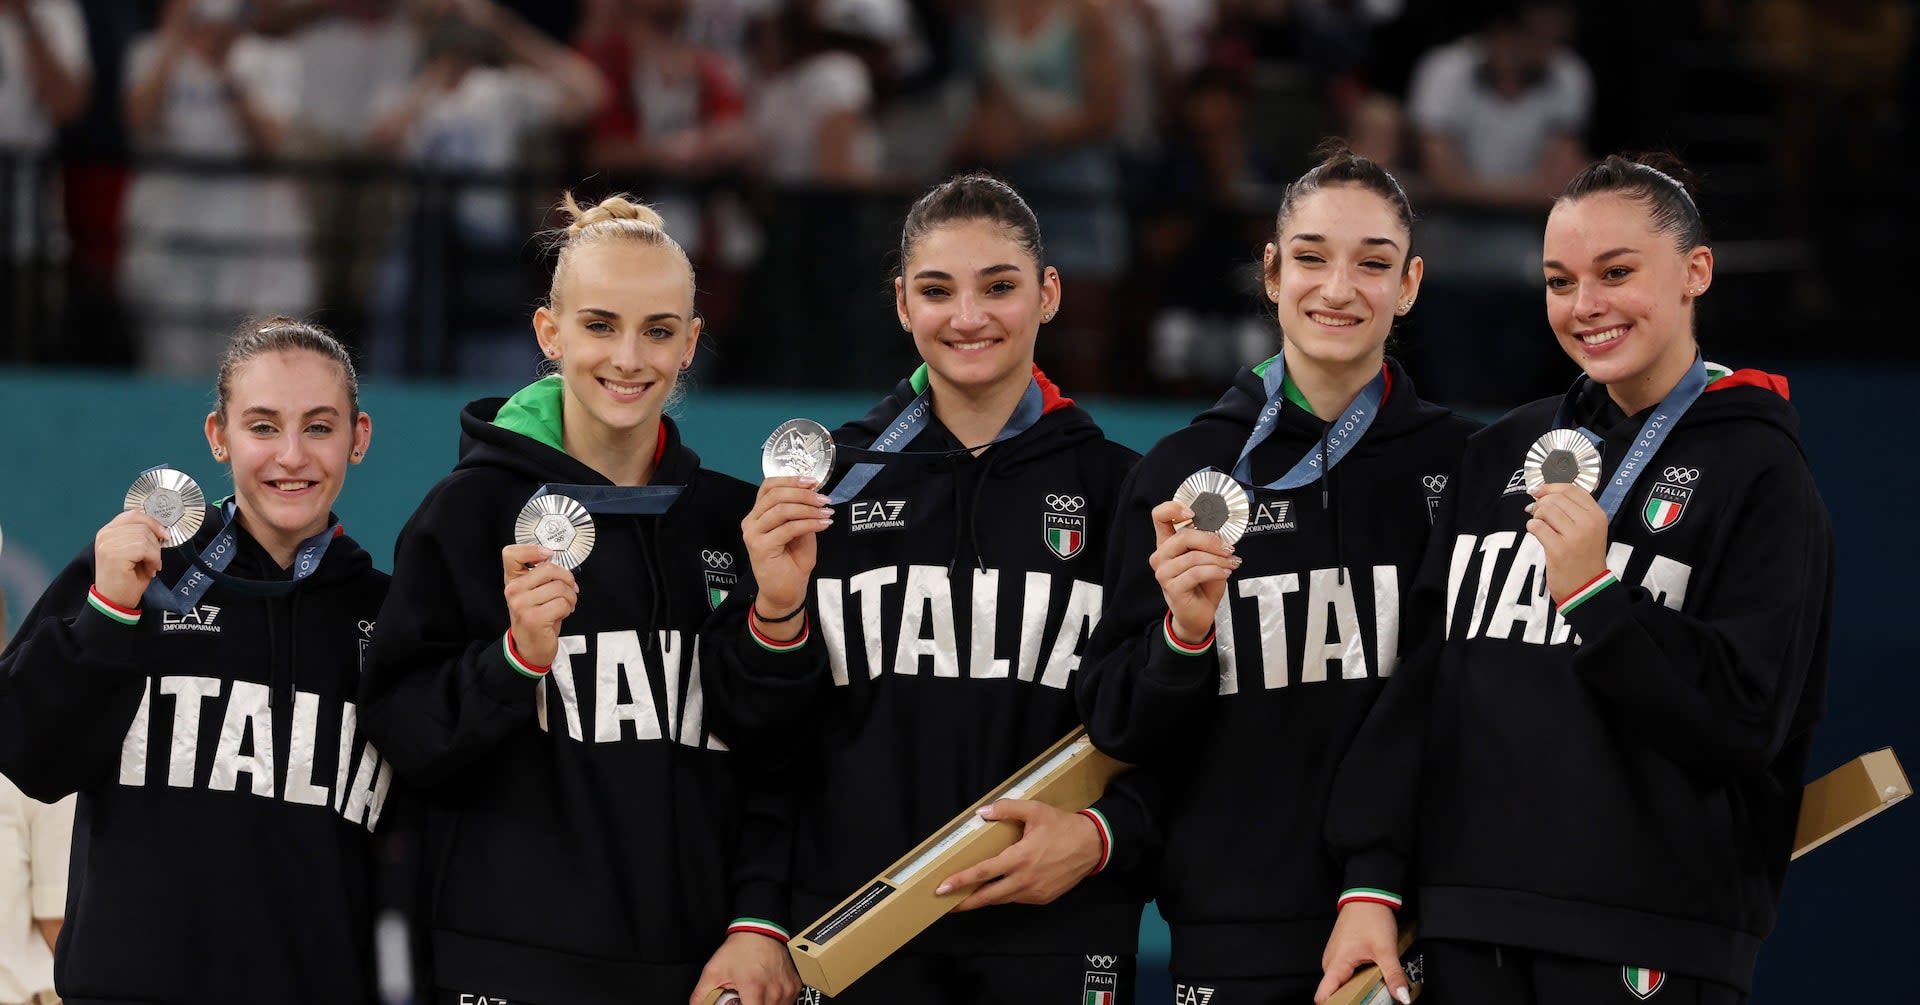 Gymnastics-Italy and Brazil celebrate breakthrough medal success in team final